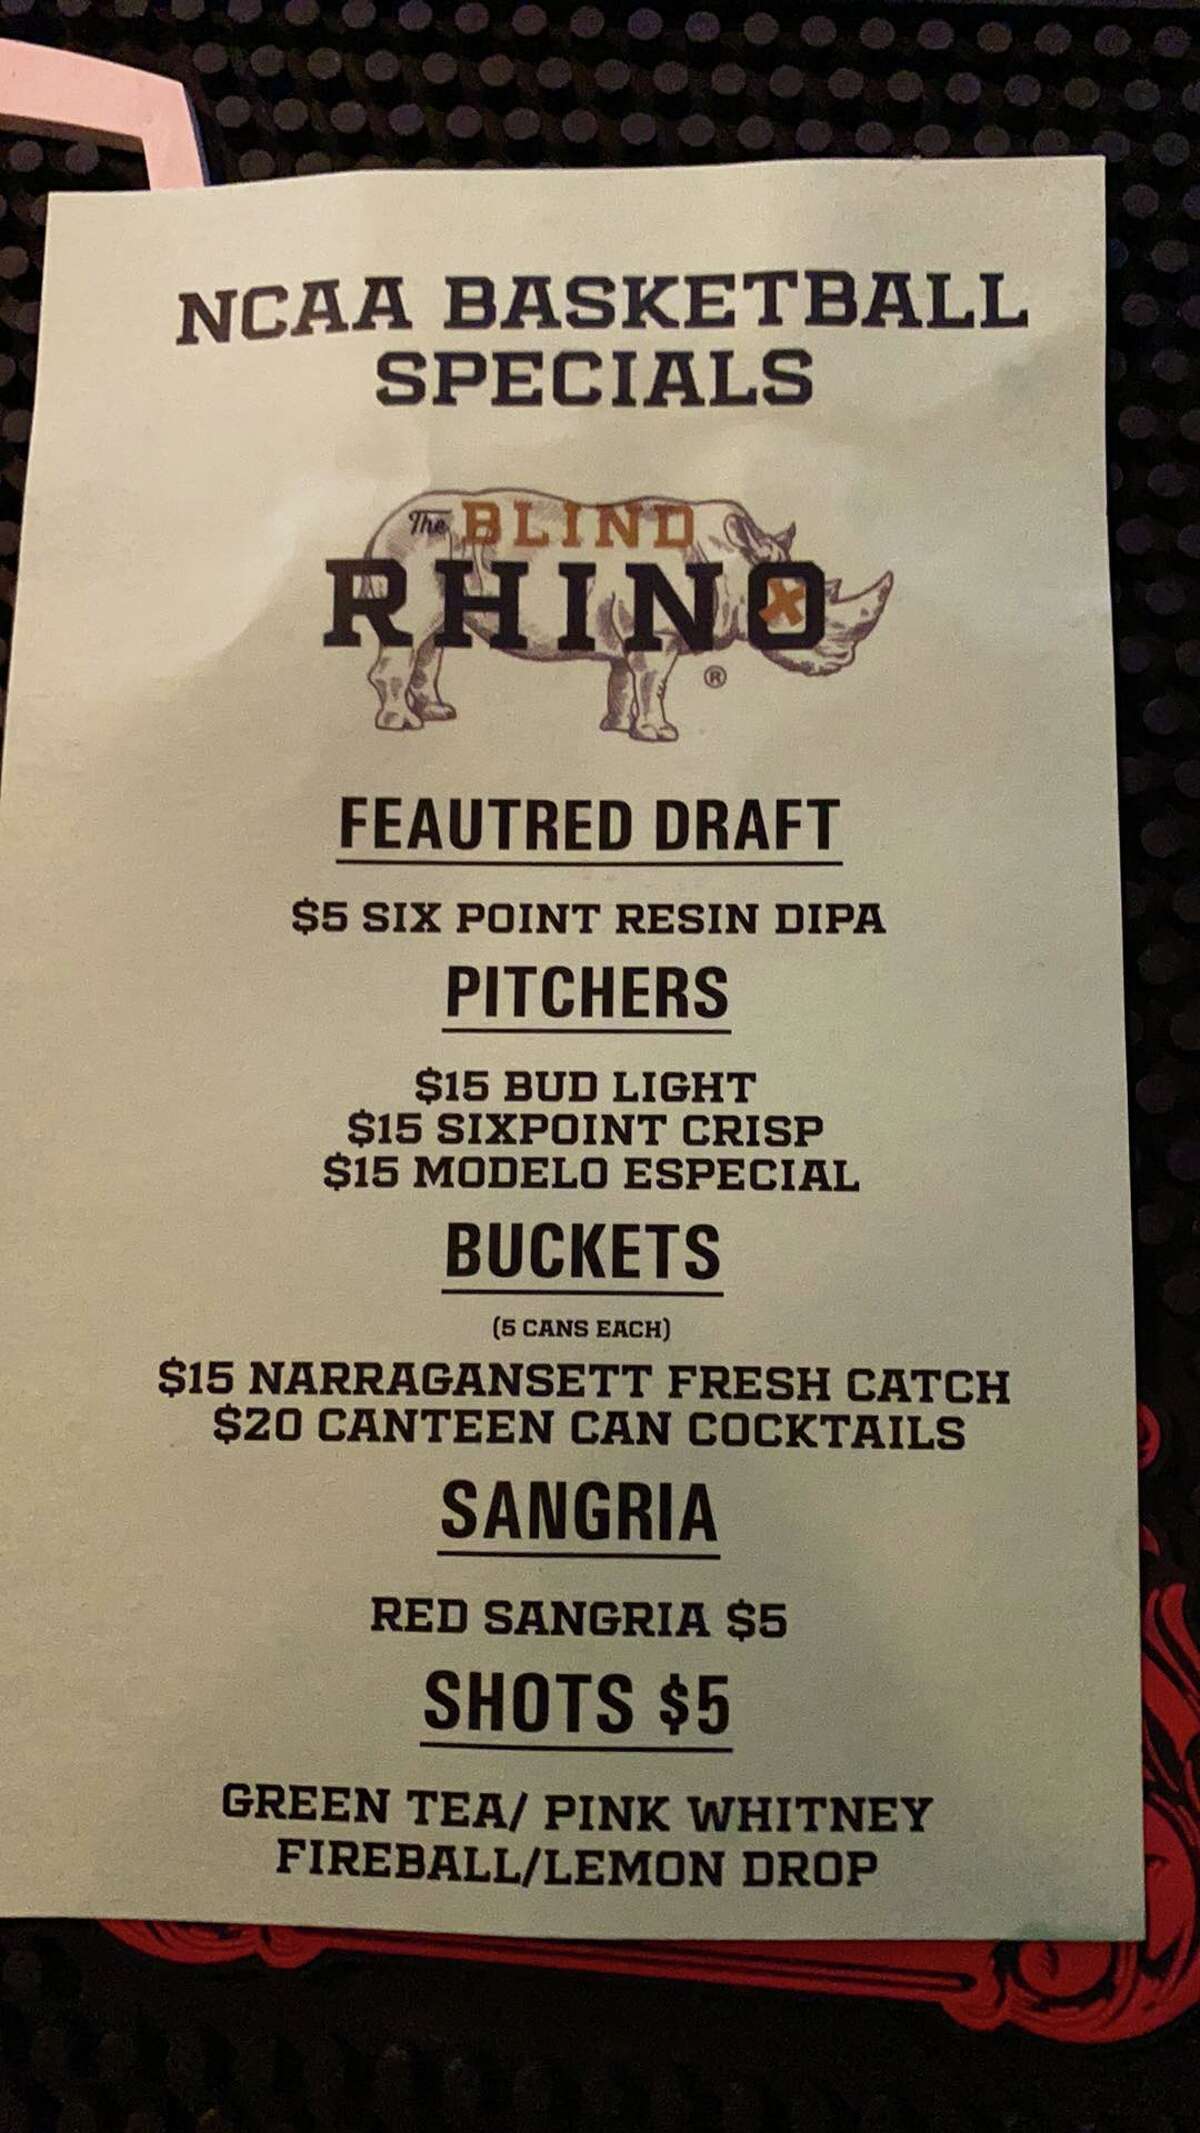 The Blind Rhino's special drink menu during the 2022 NCAA tournament.   The Blind Rhino  The Blind Rhino sports bar is featuring multiple drink specials throughout the tournament including $15 pitchers of Budlight, Sixpoint Crisp and Modelo Especial as well as $5 Sangria. Customers can watch the games on one of their 22 televisions. Here are some other sports bars showing the game. The Blind Rhino is located at 3425 Fairfield Ave in Bridgeport.